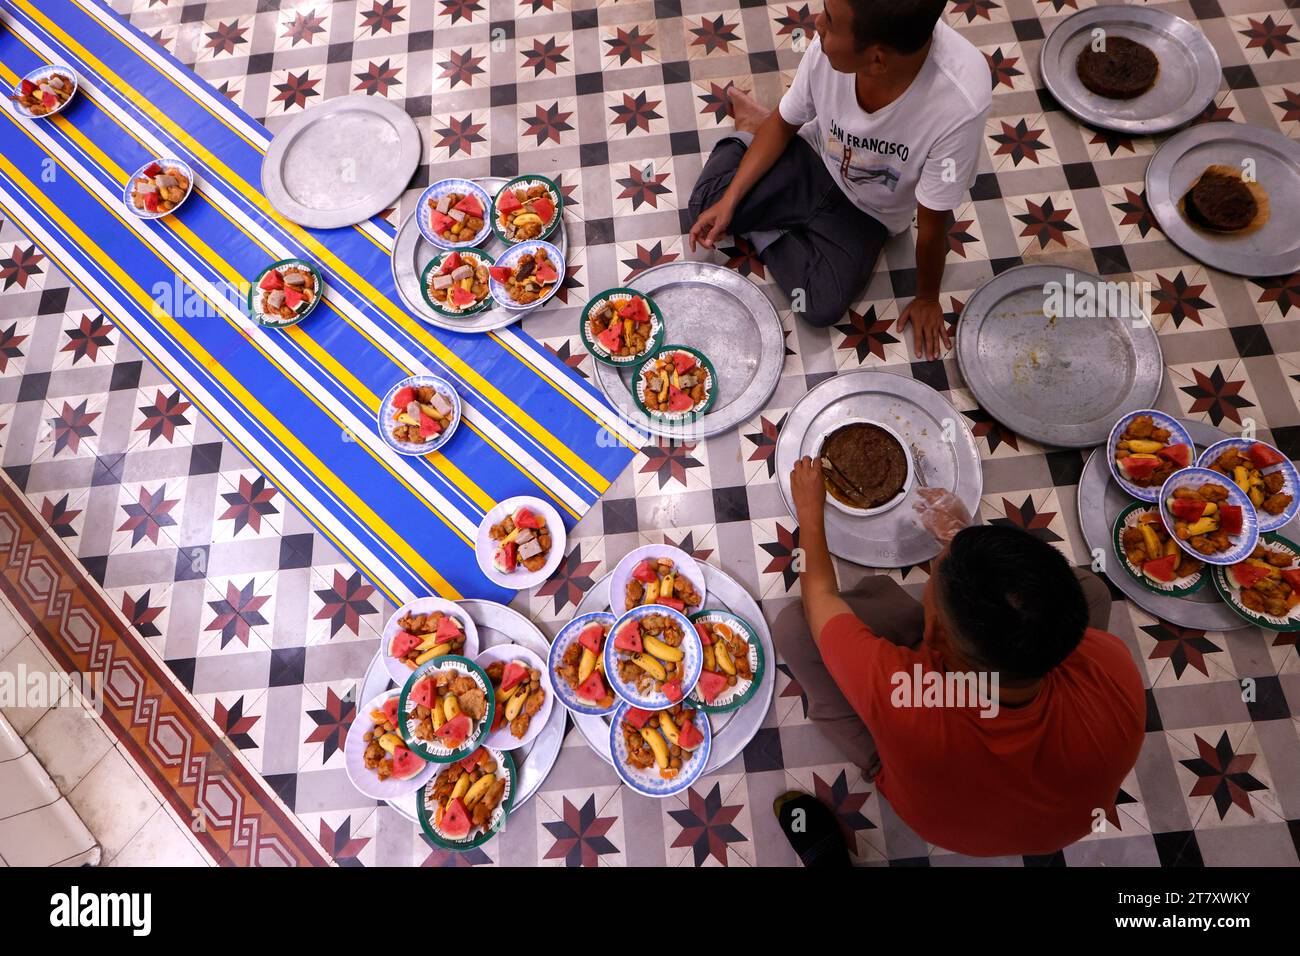 Iftar (Ramadan dinner breaking the day-long fast) at Saigon Mosque, Ho Chi Minh City, Vietnam, Indochina, Southeast Asia, Asia Stock Photo